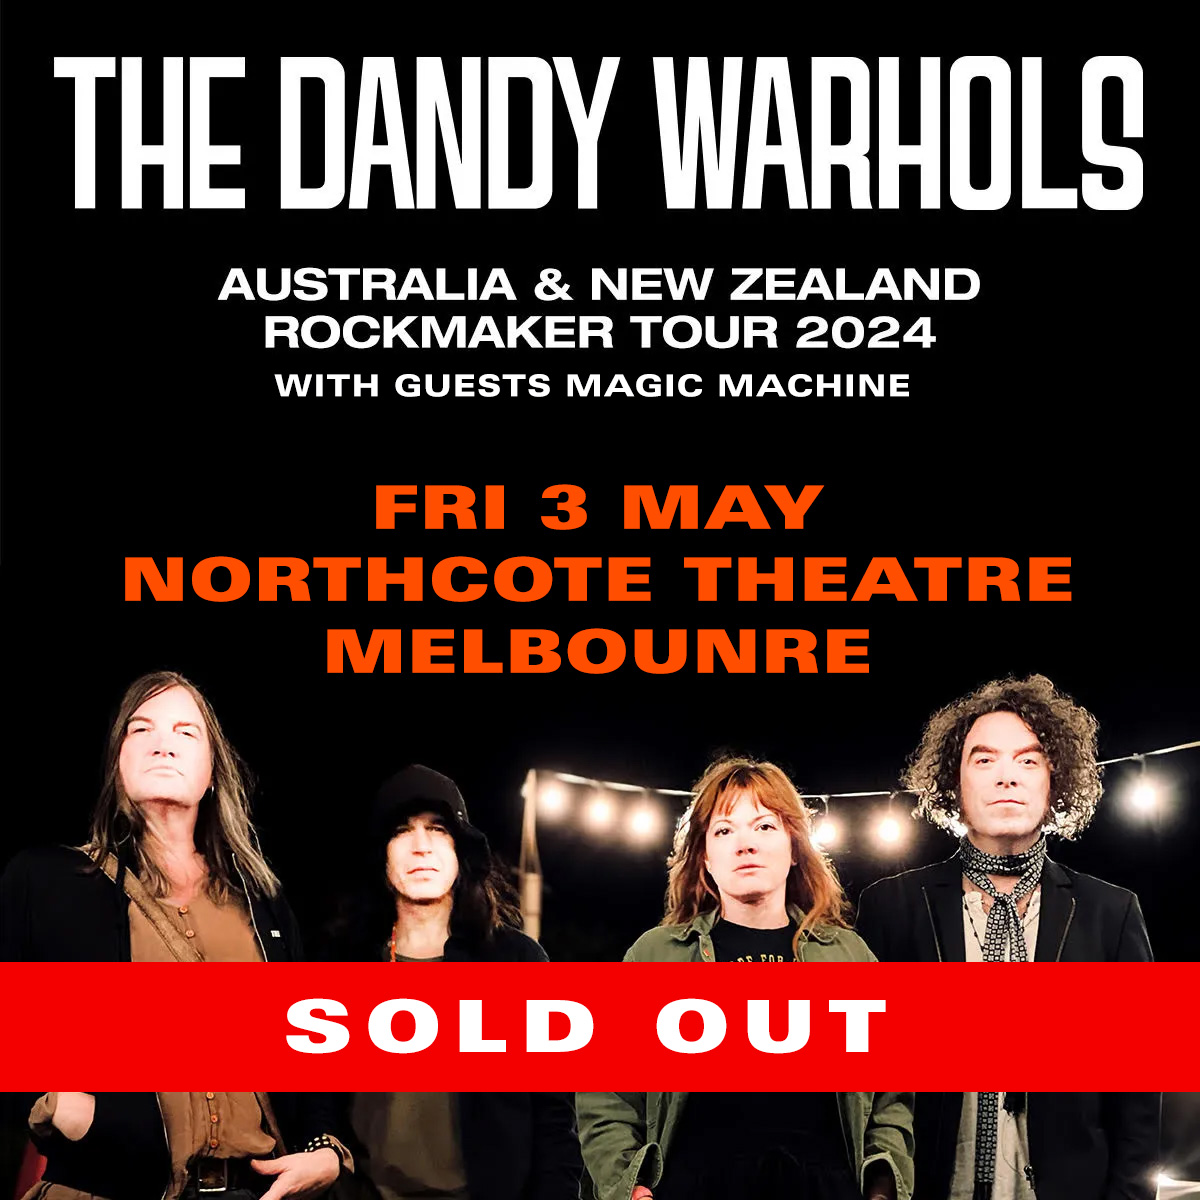 🇦🇺 DANDYS LIVE Tomorrow 3/5 Northcote Theatre Melbourne - SOLD OUT